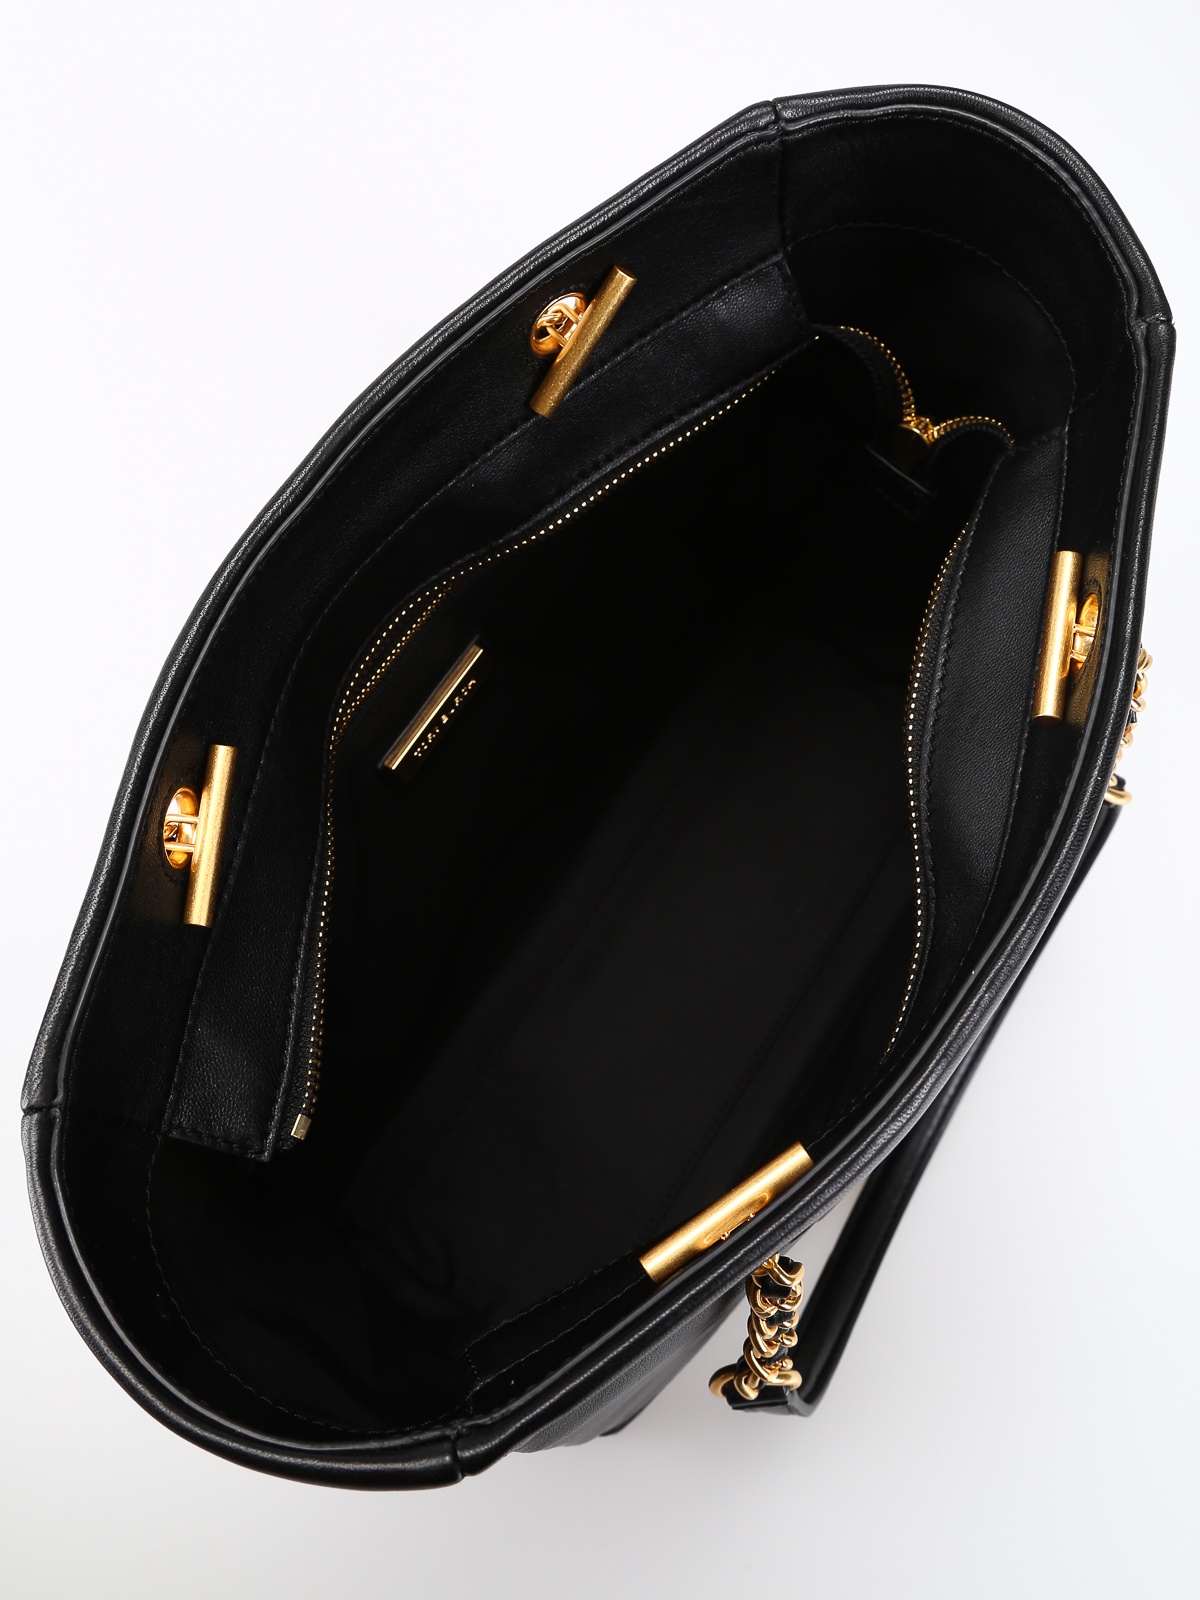  Black Handbags With Gold Chain